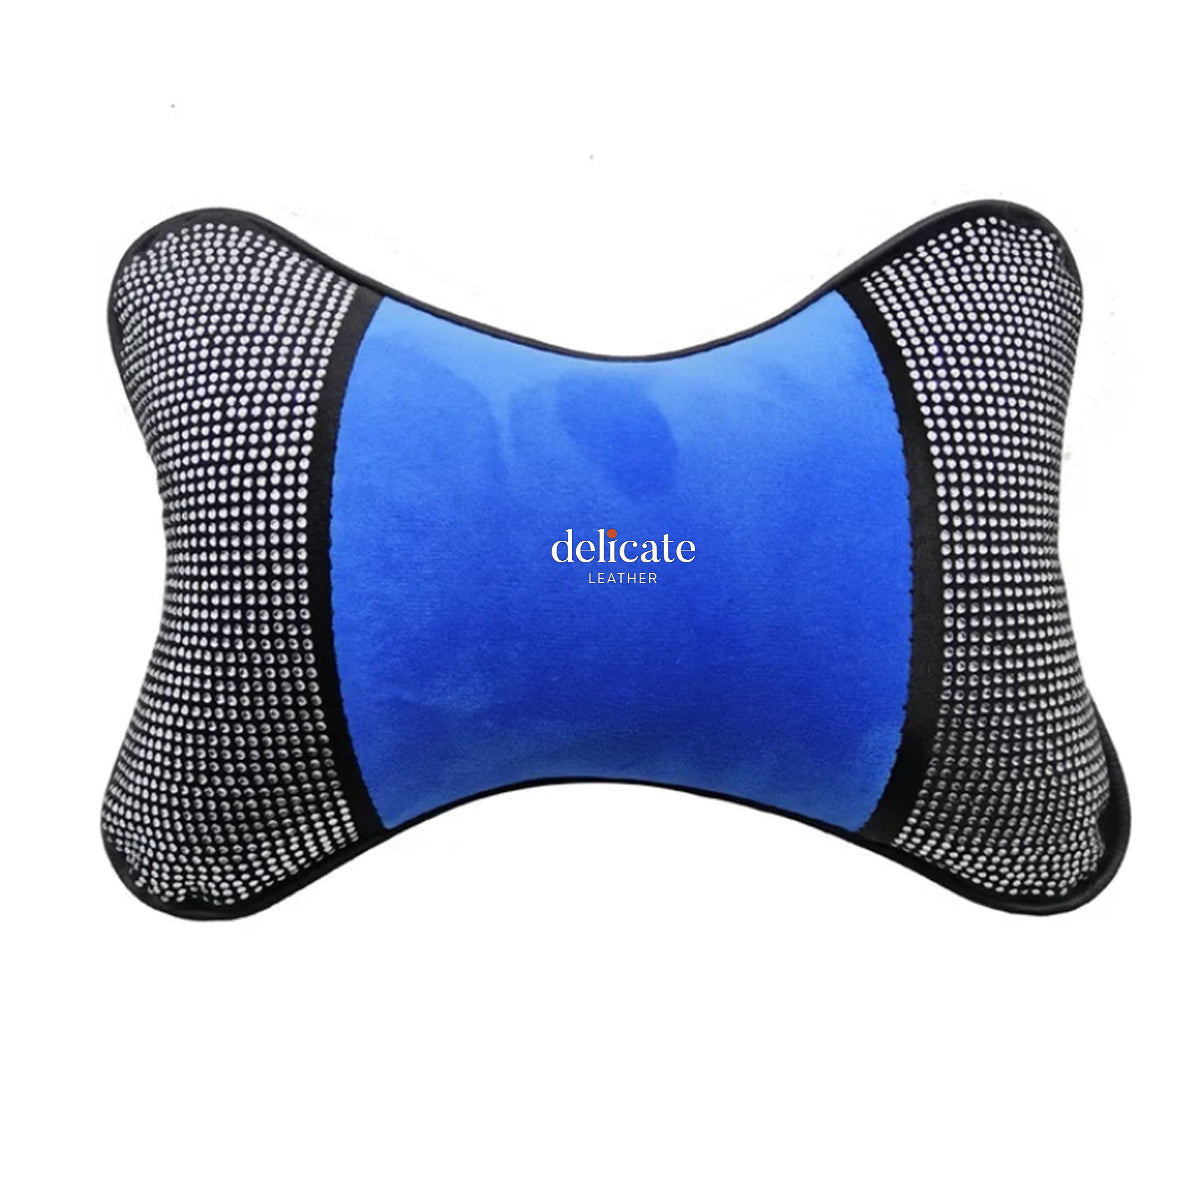 Universal Car Neck Pillow for Comfortable Support - Compatible with Most Auto Accessories and Filled with Fiber Material - Delicate Leather